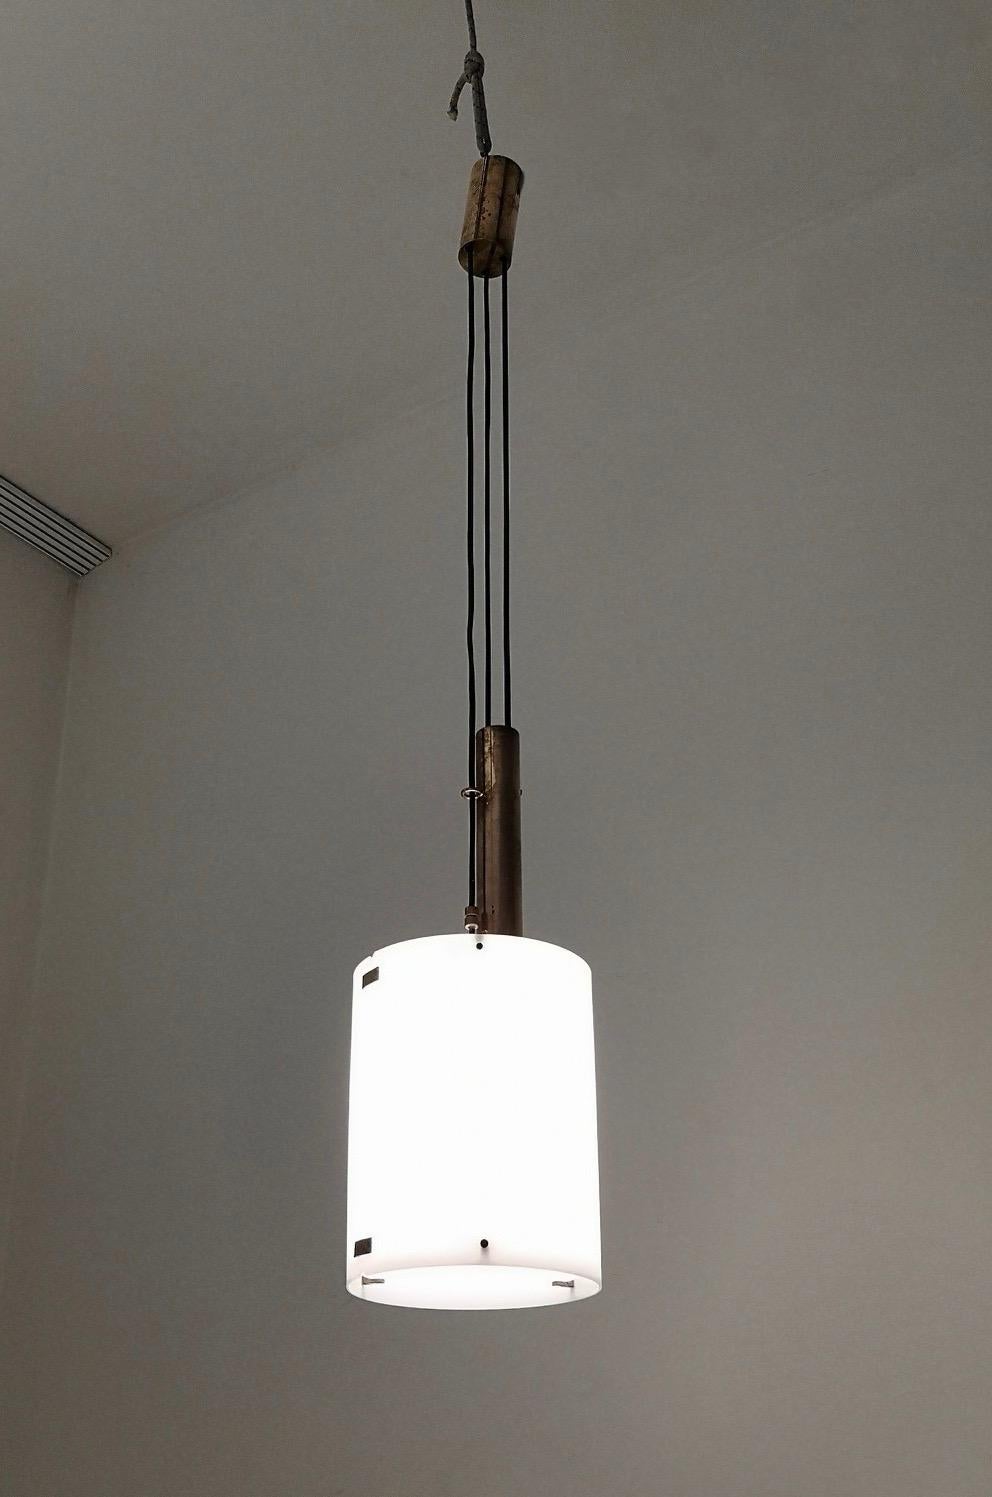 Mid-Century Modern Midcentury Adjustable Pendant Mod. 437 by Tito Agnoli Produced by O-Luce, 1954